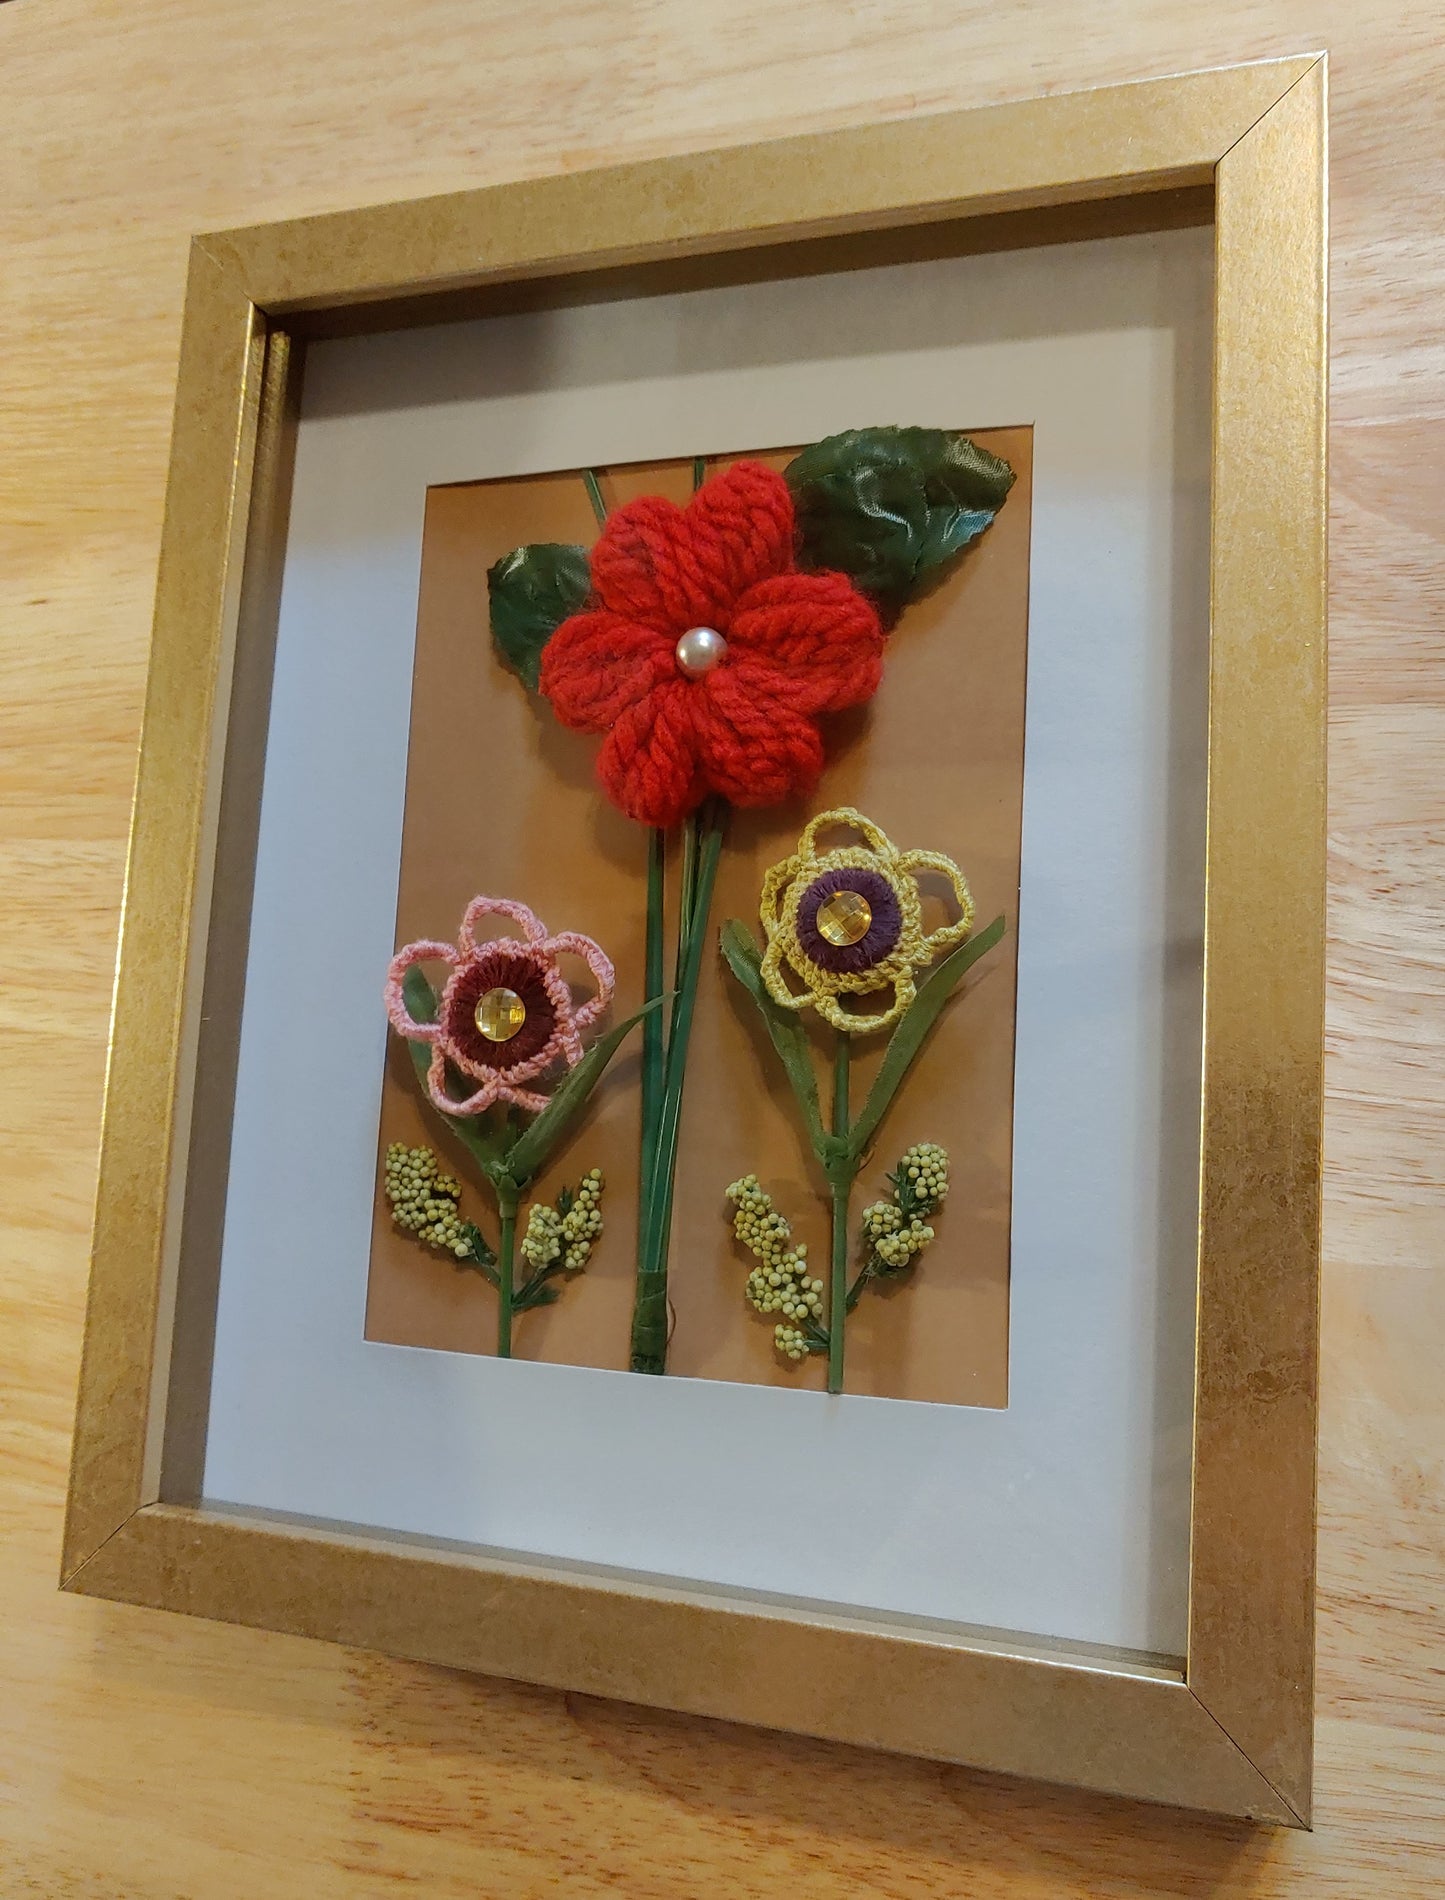 Hand-Embroidered Mini-Bouquets